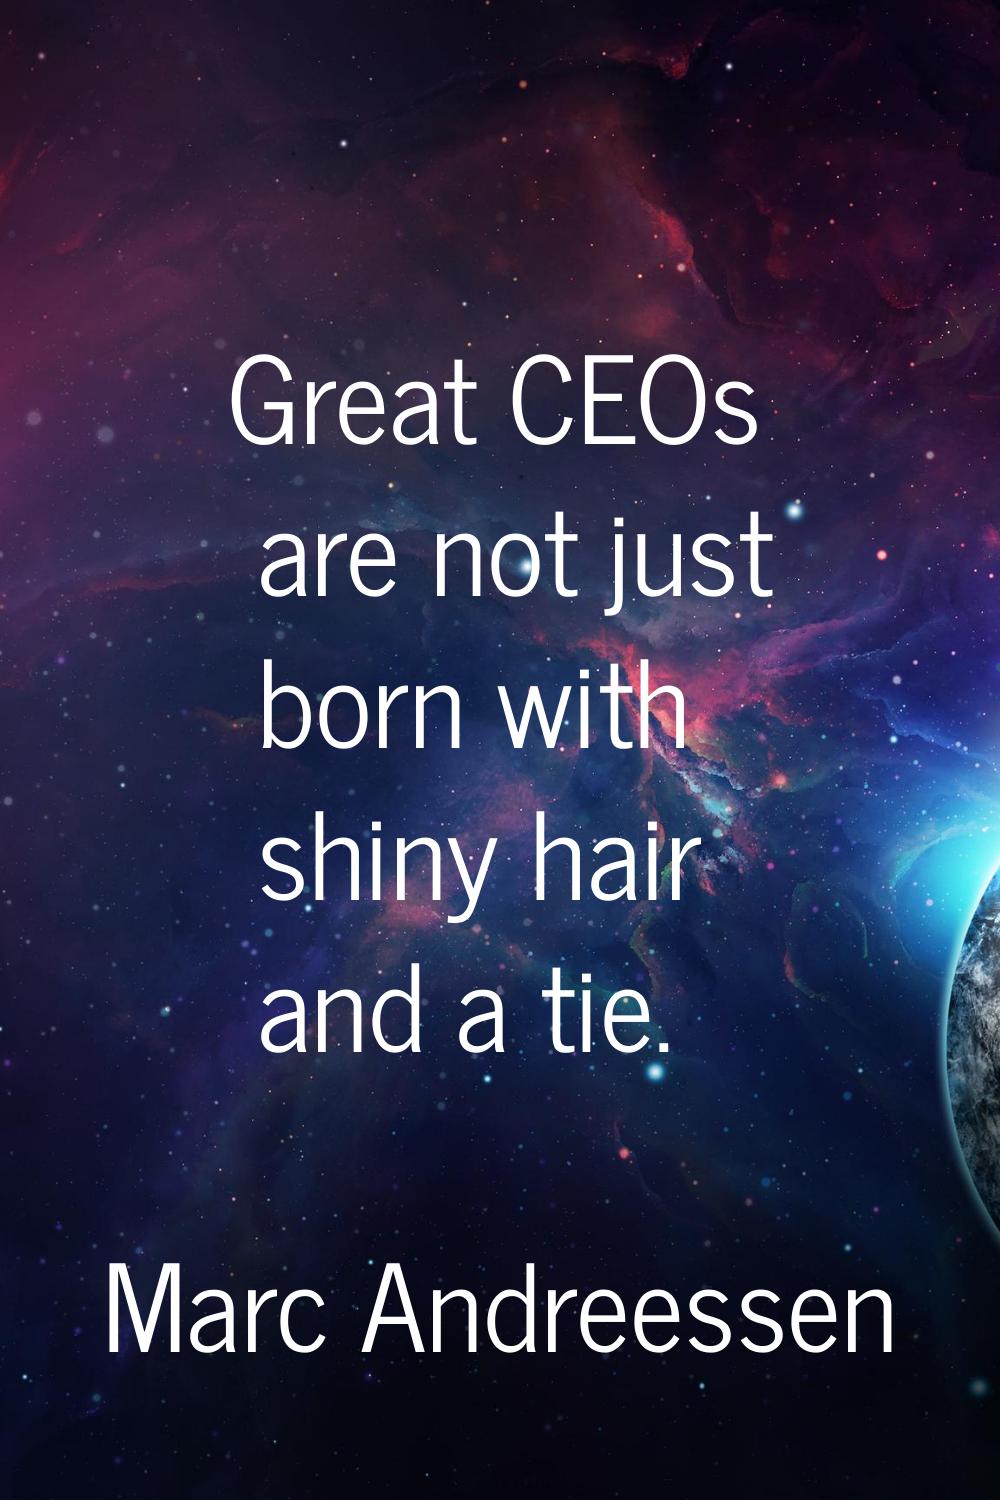 Great CEOs are not just born with shiny hair and a tie.